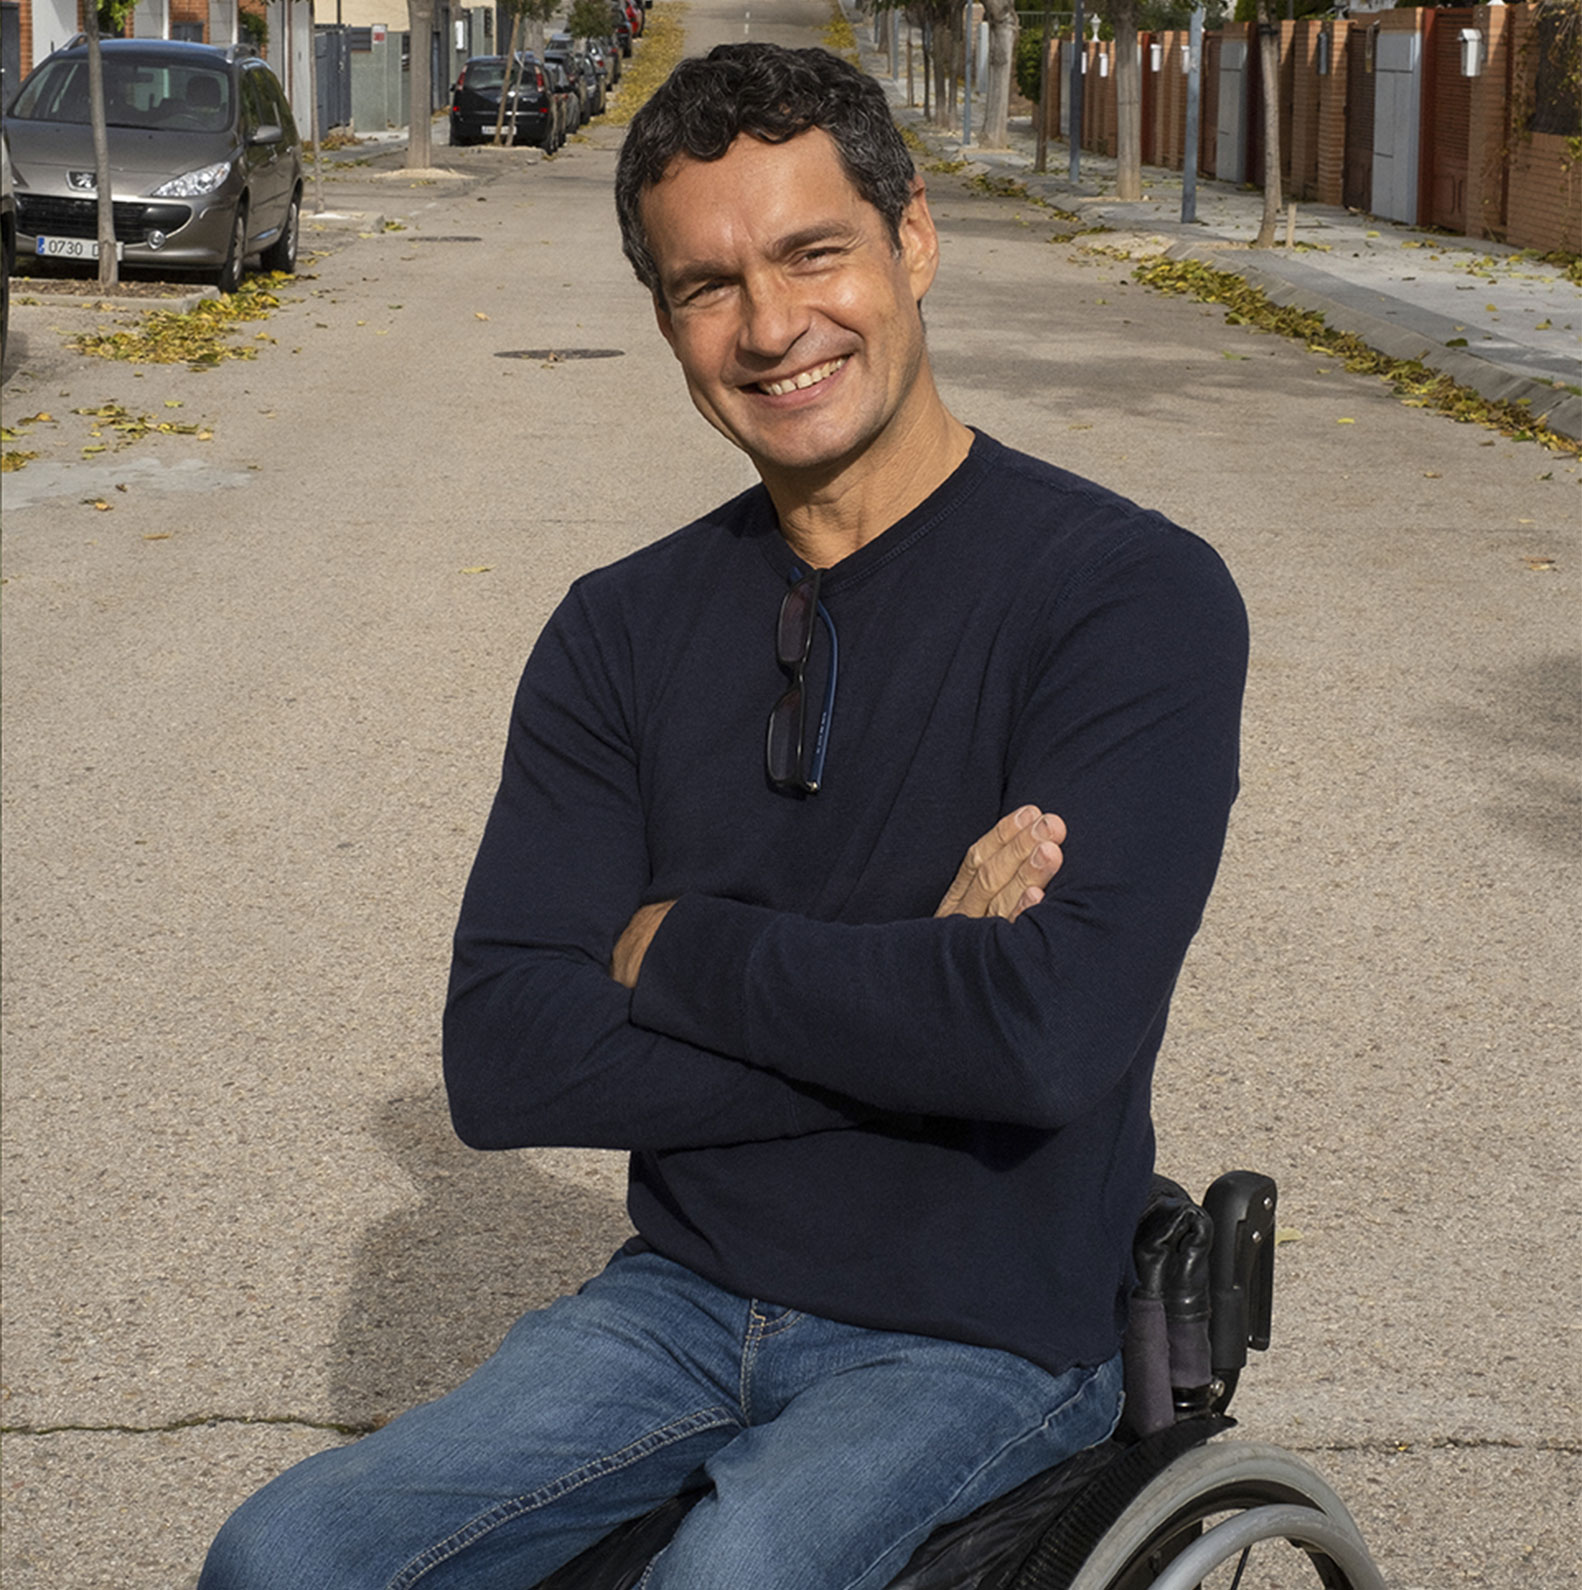 man on a wheelchair, smiling